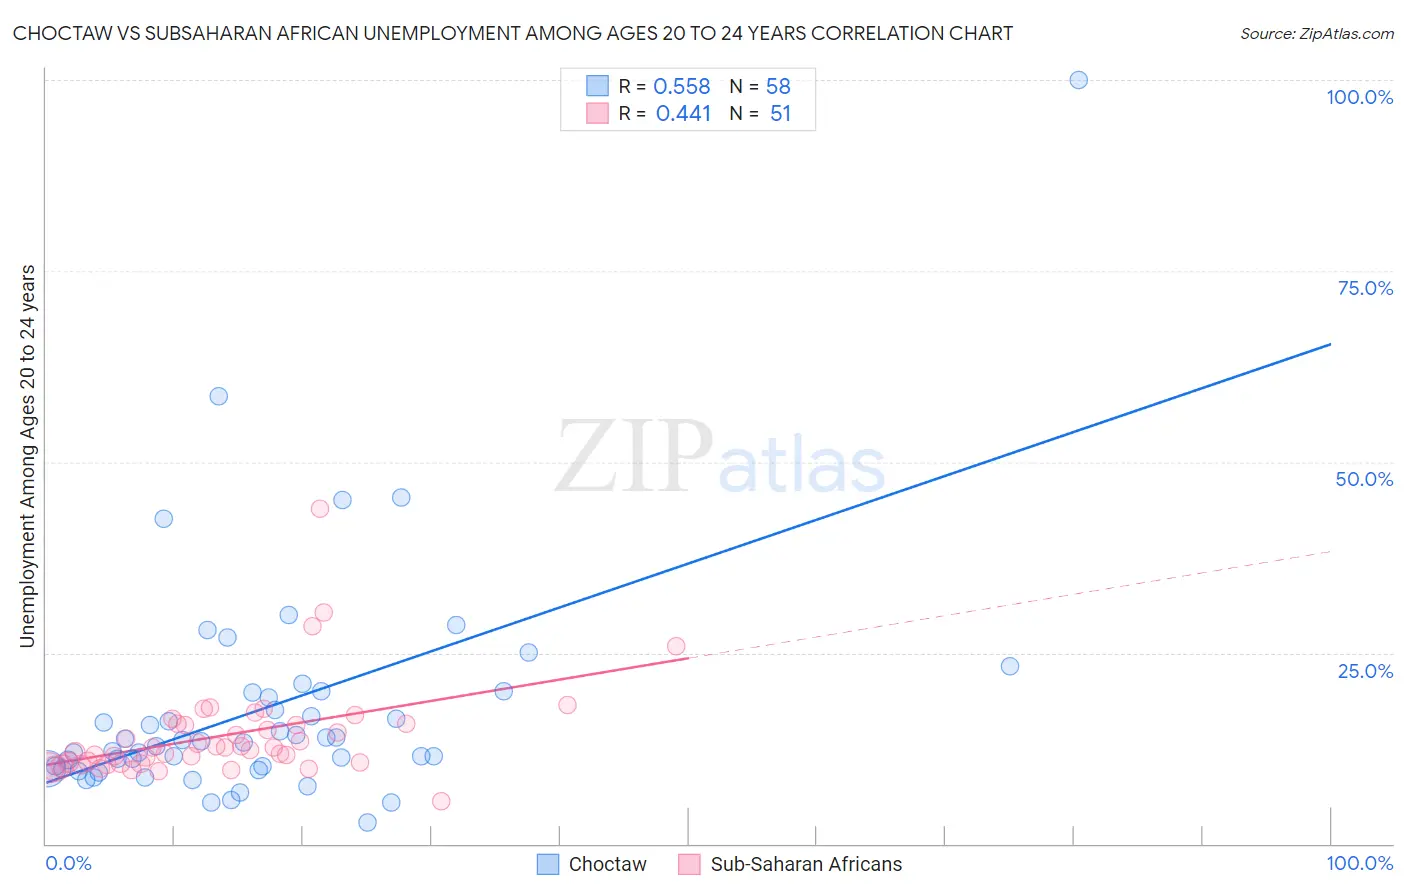 Choctaw vs Subsaharan African Unemployment Among Ages 20 to 24 years